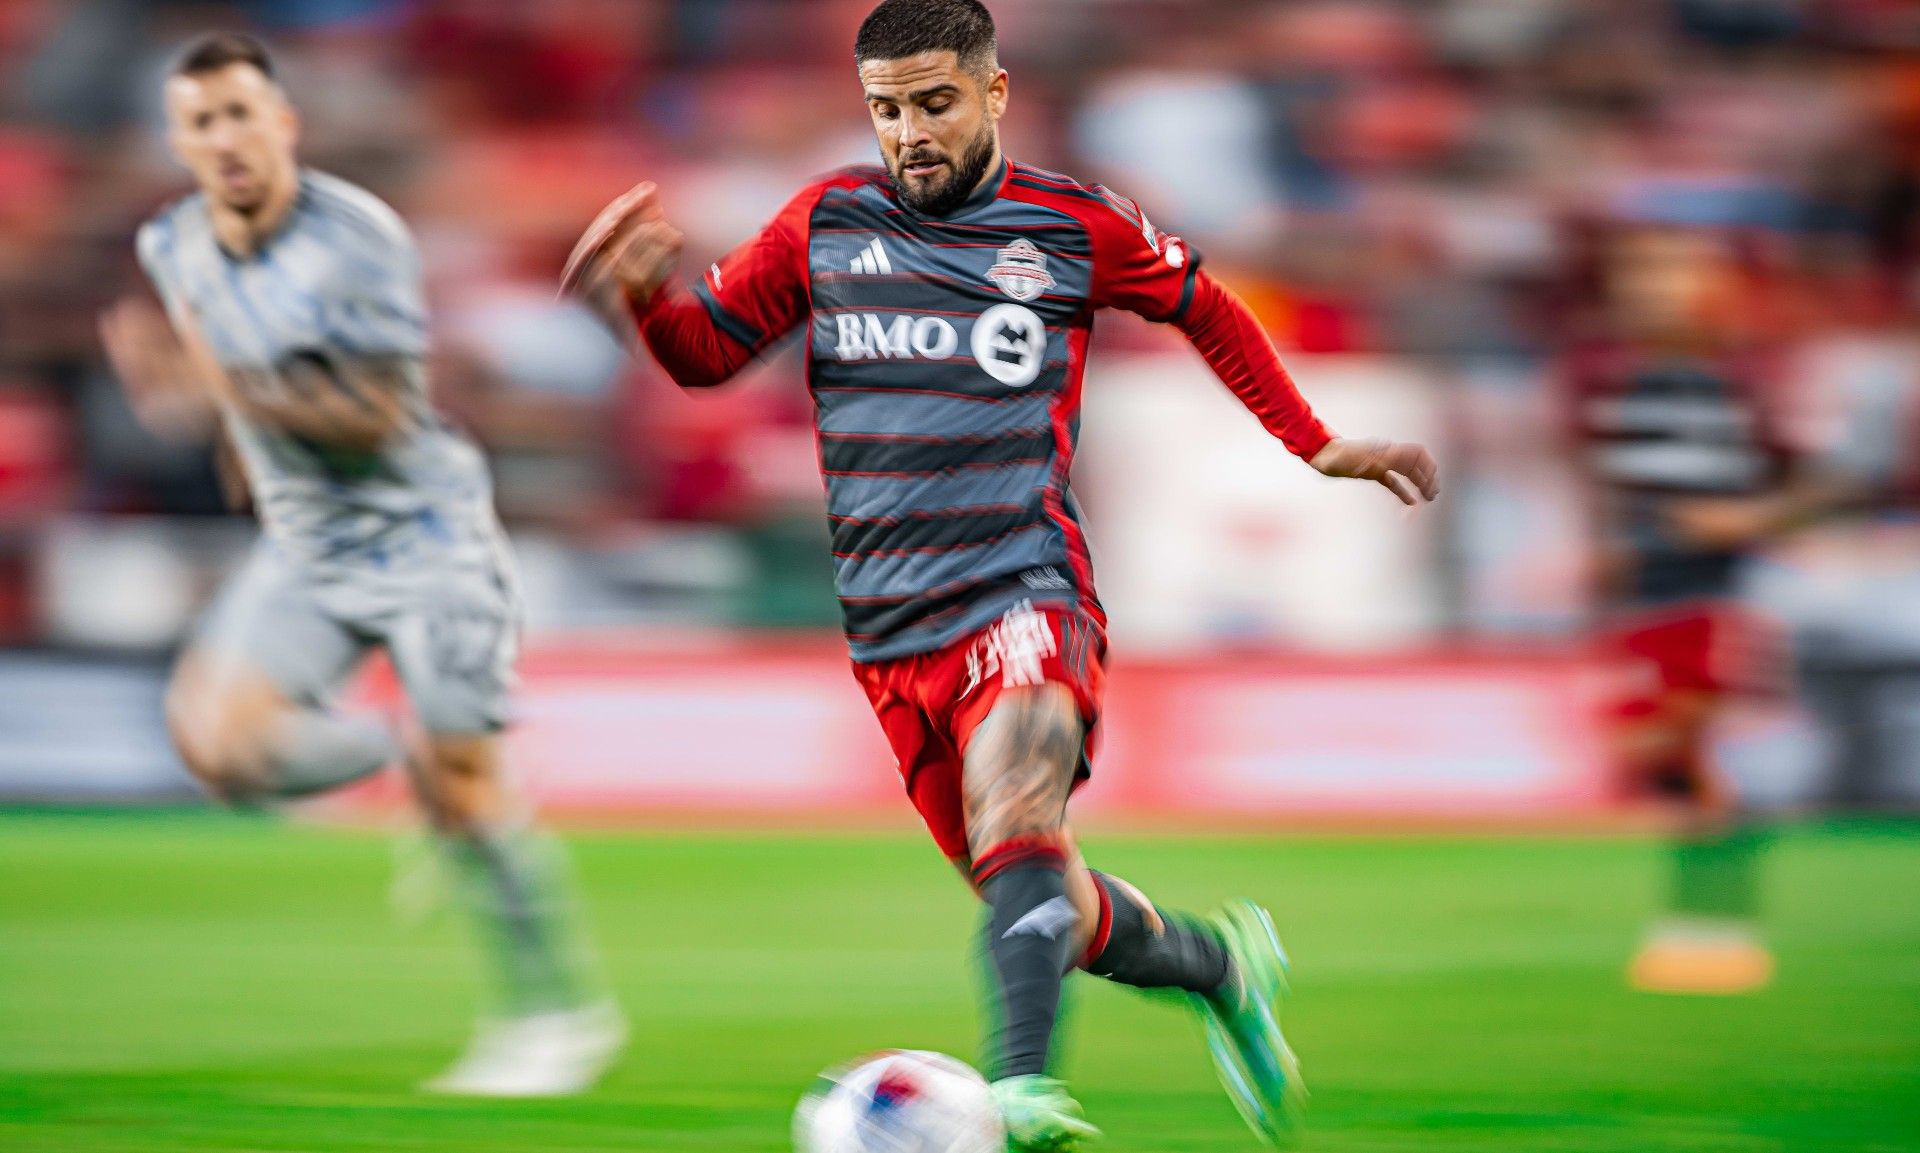 Reader mailbag: How can TFC end this tailspin and get back on track?